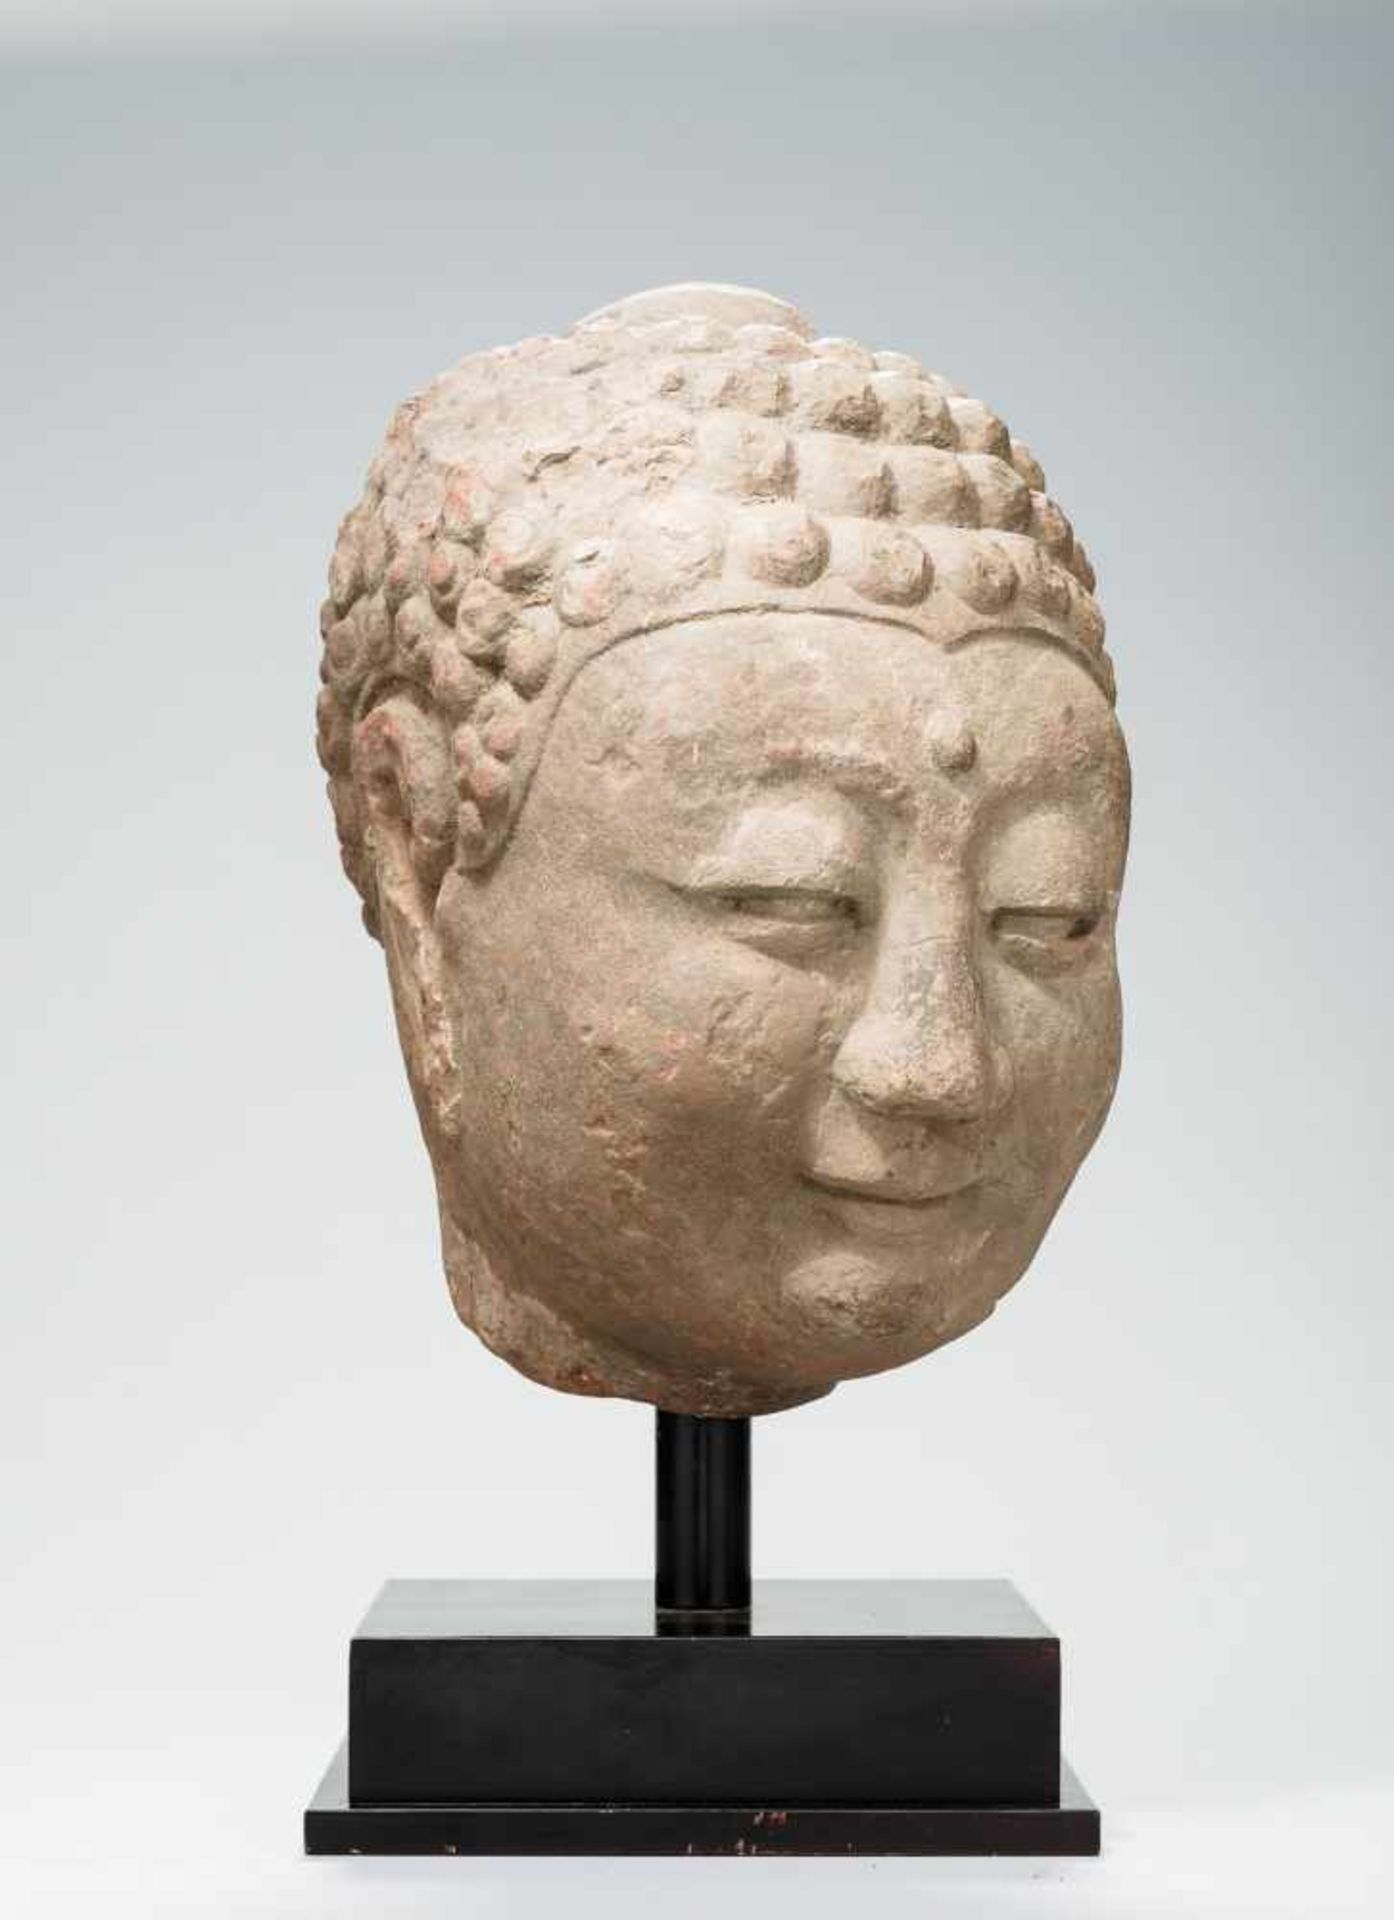 A LARGE HEAD OF A BUDDHA Red sandstone. China, Song Dynasty, approx. 12th / 13th century A rare